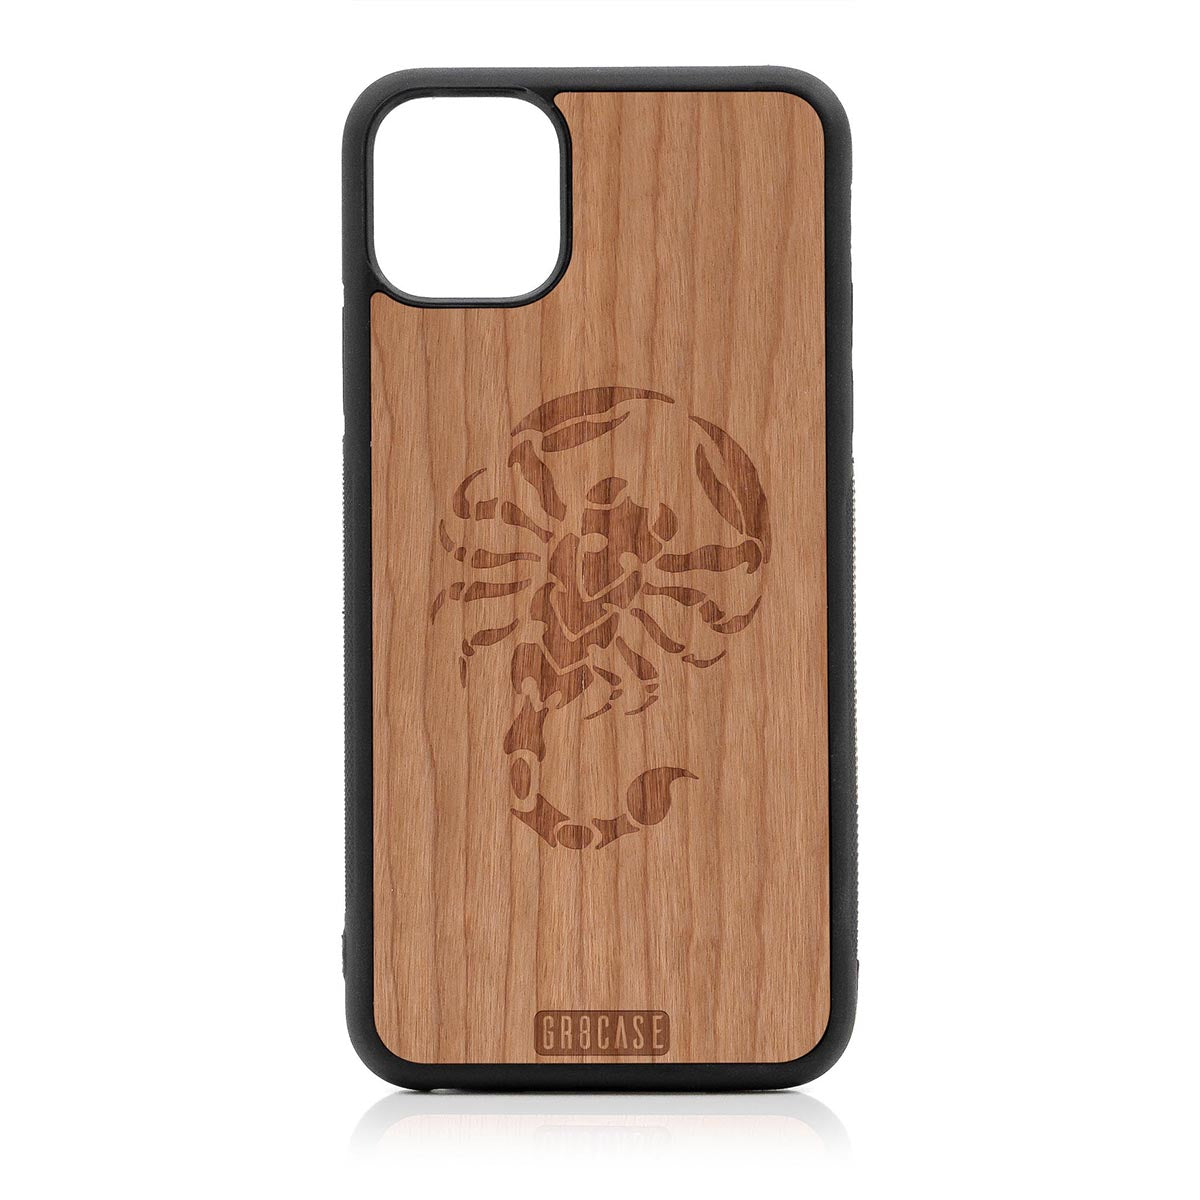 Scorpion Design Wood Case For iPhone 11 Pro Max by GR8CASE